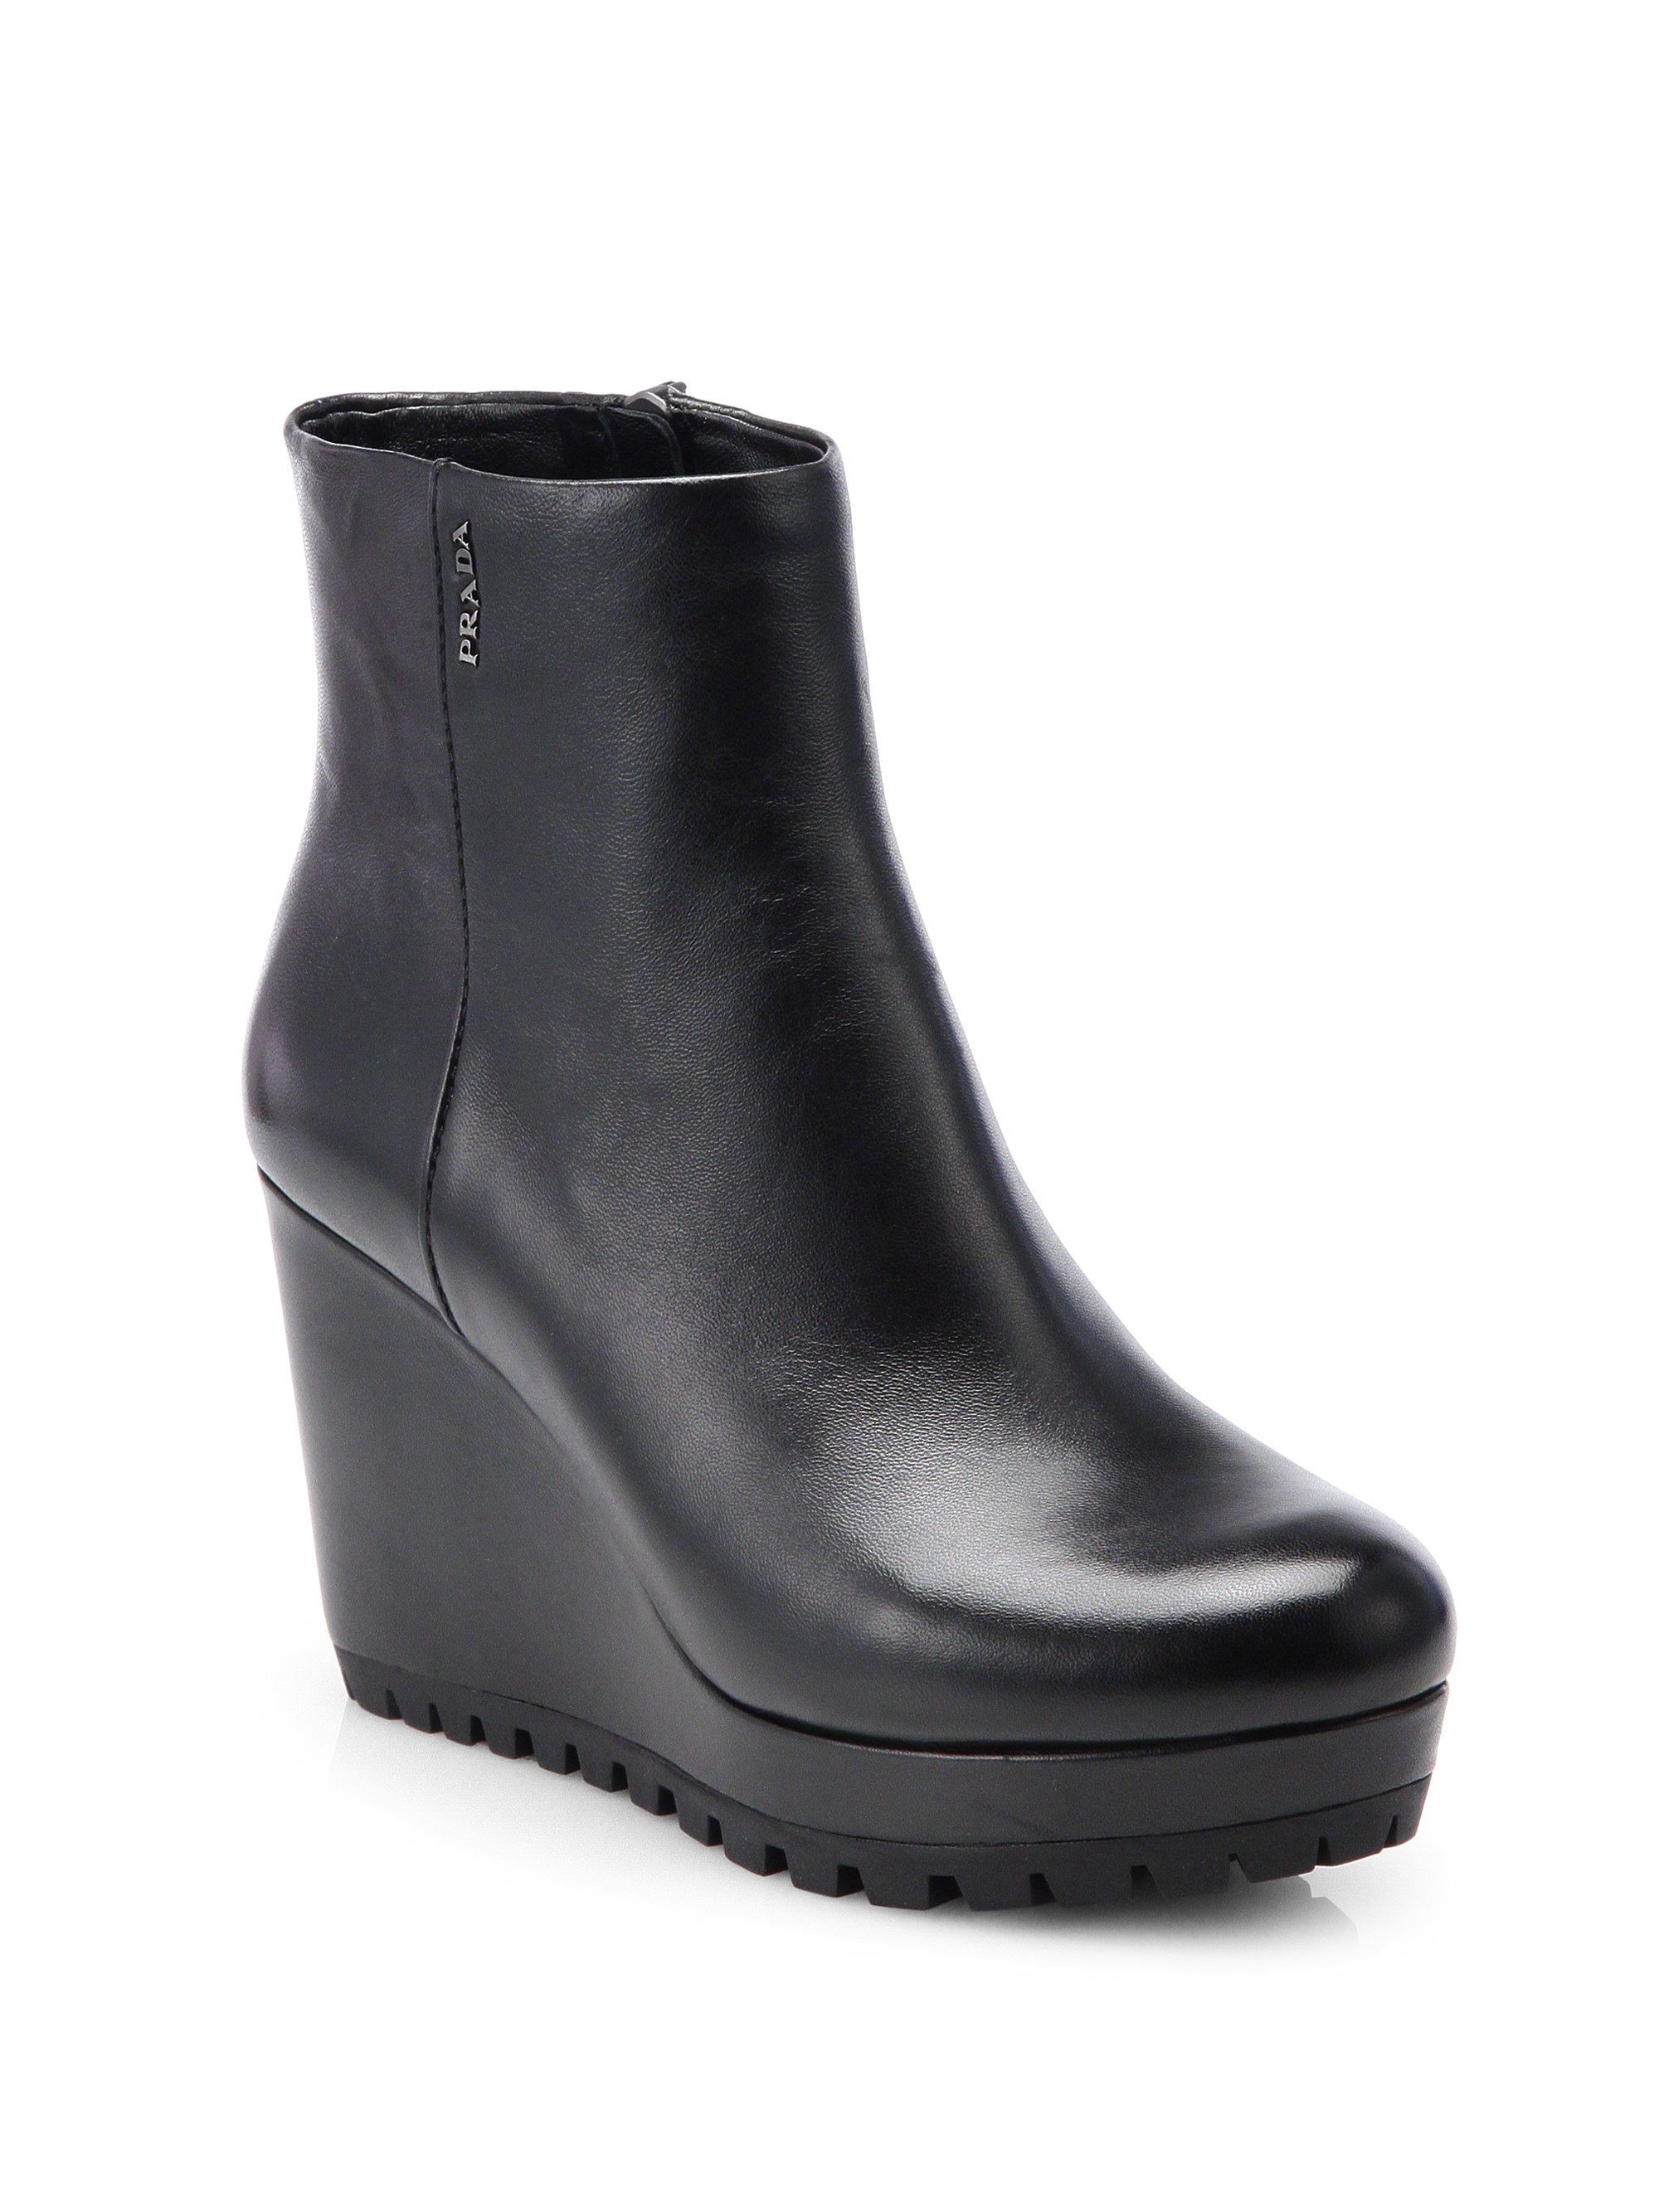 Prada Leather Wedge Ankle Boots in Black | Lyst